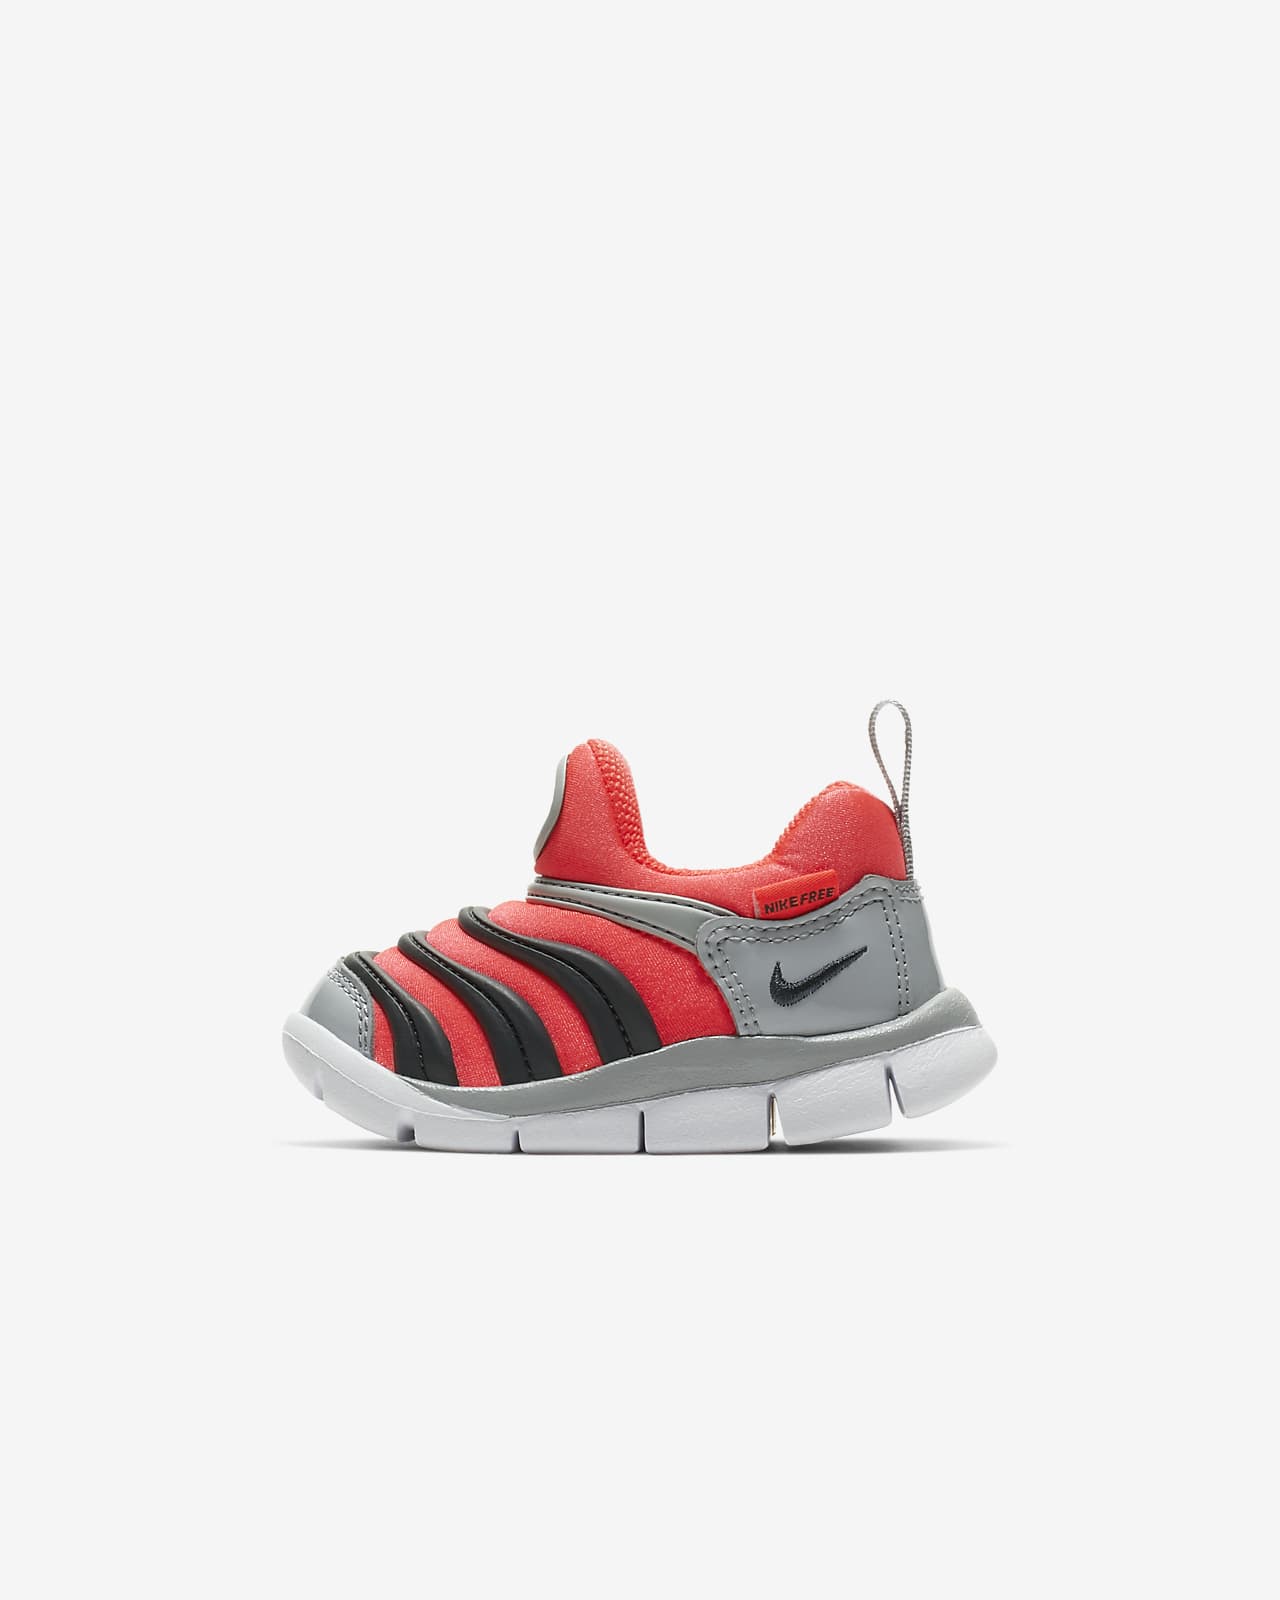 Nike Dynamo Free Baby and Toddler Shoe 